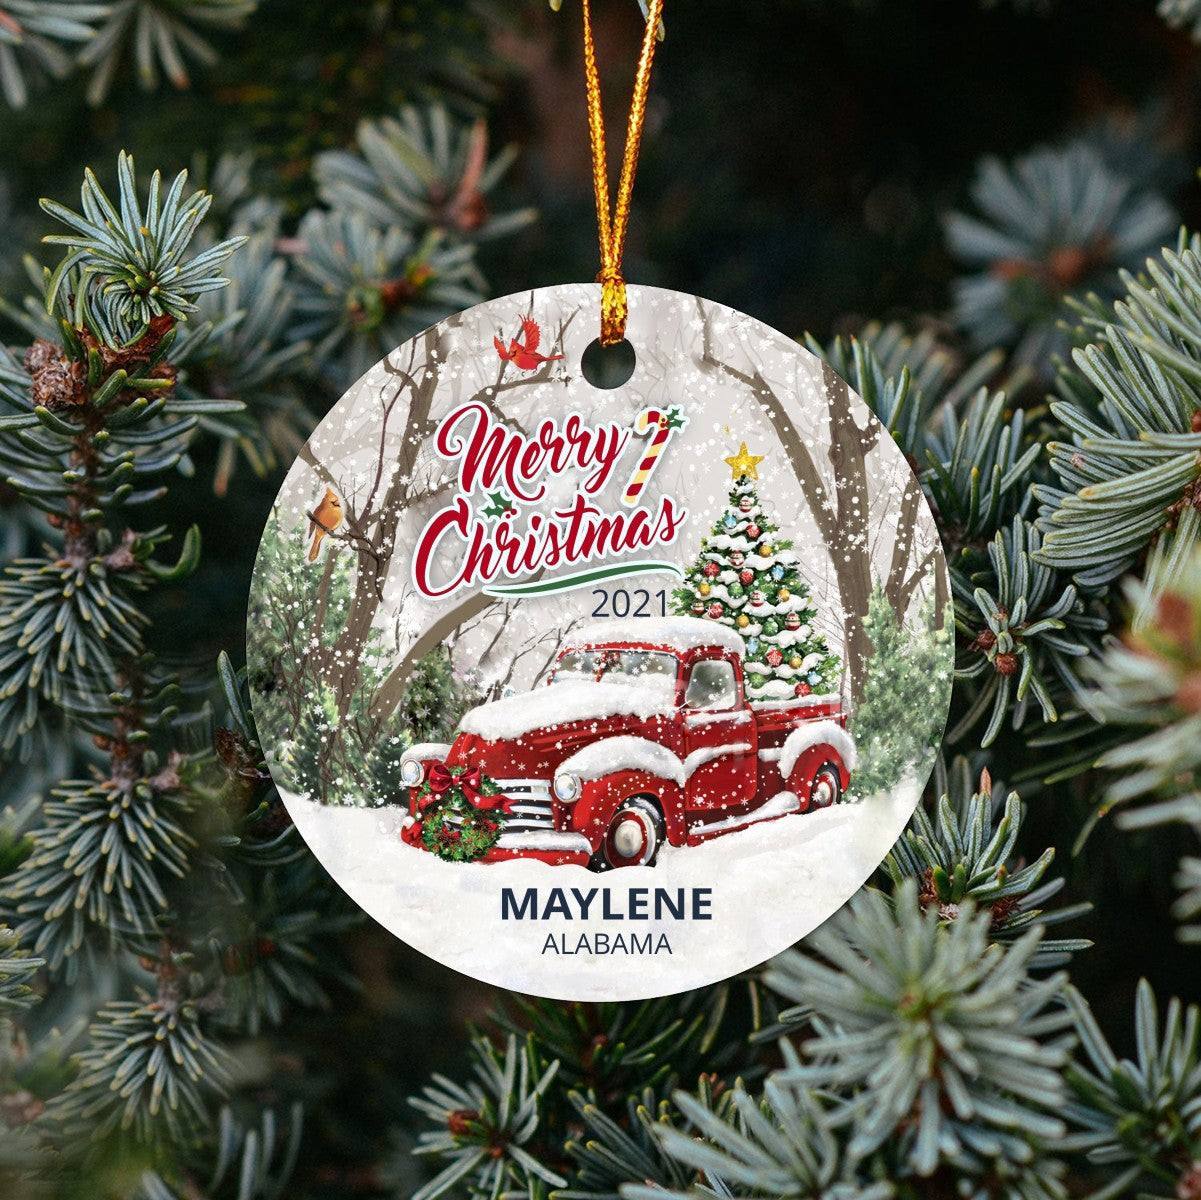 Christmas Tree Ornaments Maylene - Ornament With Name City, State Maylene Alabama AL Ornament - Red Truck Xmas Ornaments 3'' Plastic Gift For Family, Friend And Housewarming